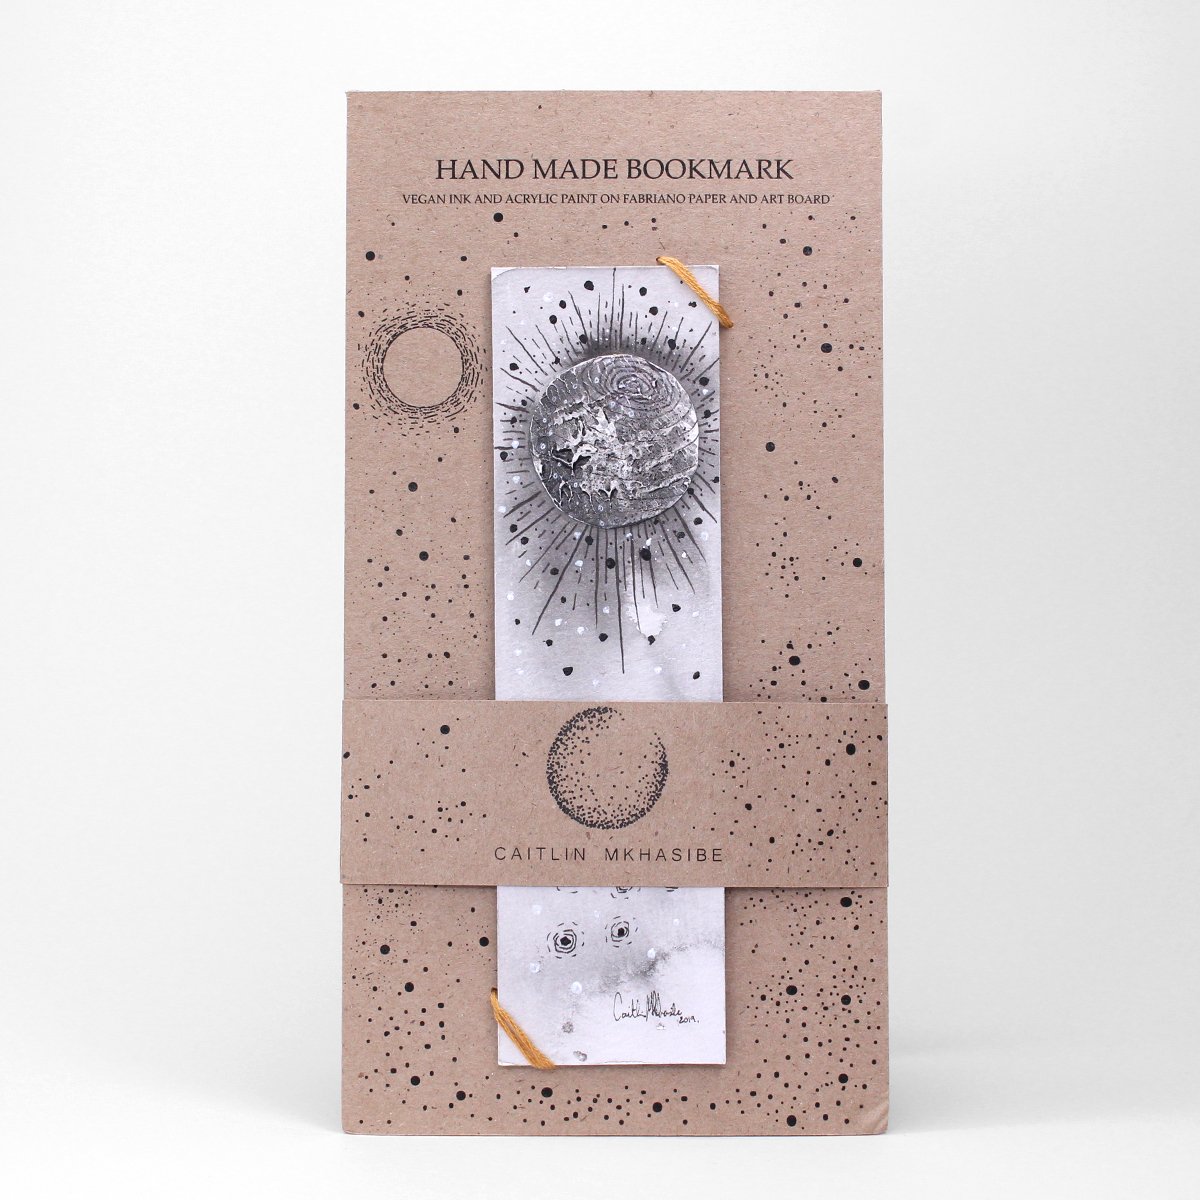 Monochromatic, handmade, hand-painted bookmark with moon design and nude packaging. Made by Caiitlin Mkhasibe.